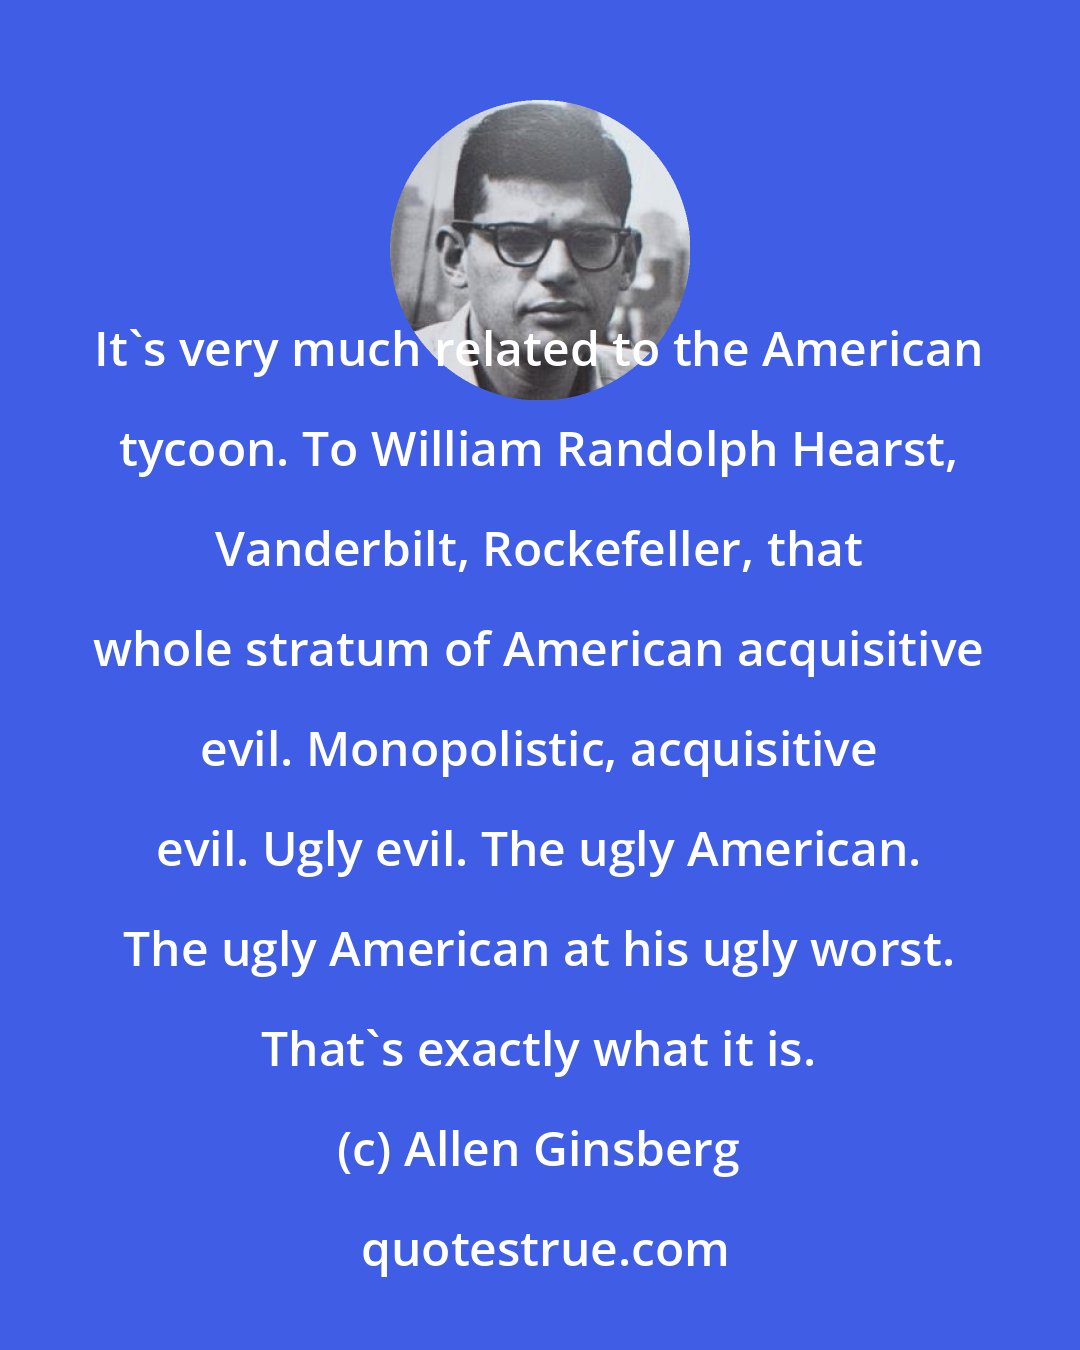 Allen Ginsberg: It's very much related to the American tycoon. To William Randolph Hearst, Vanderbilt, Rockefeller, that whole stratum of American acquisitive evil. Monopolistic, acquisitive evil. Ugly evil. The ugly American. The ugly American at his ugly worst. That's exactly what it is.